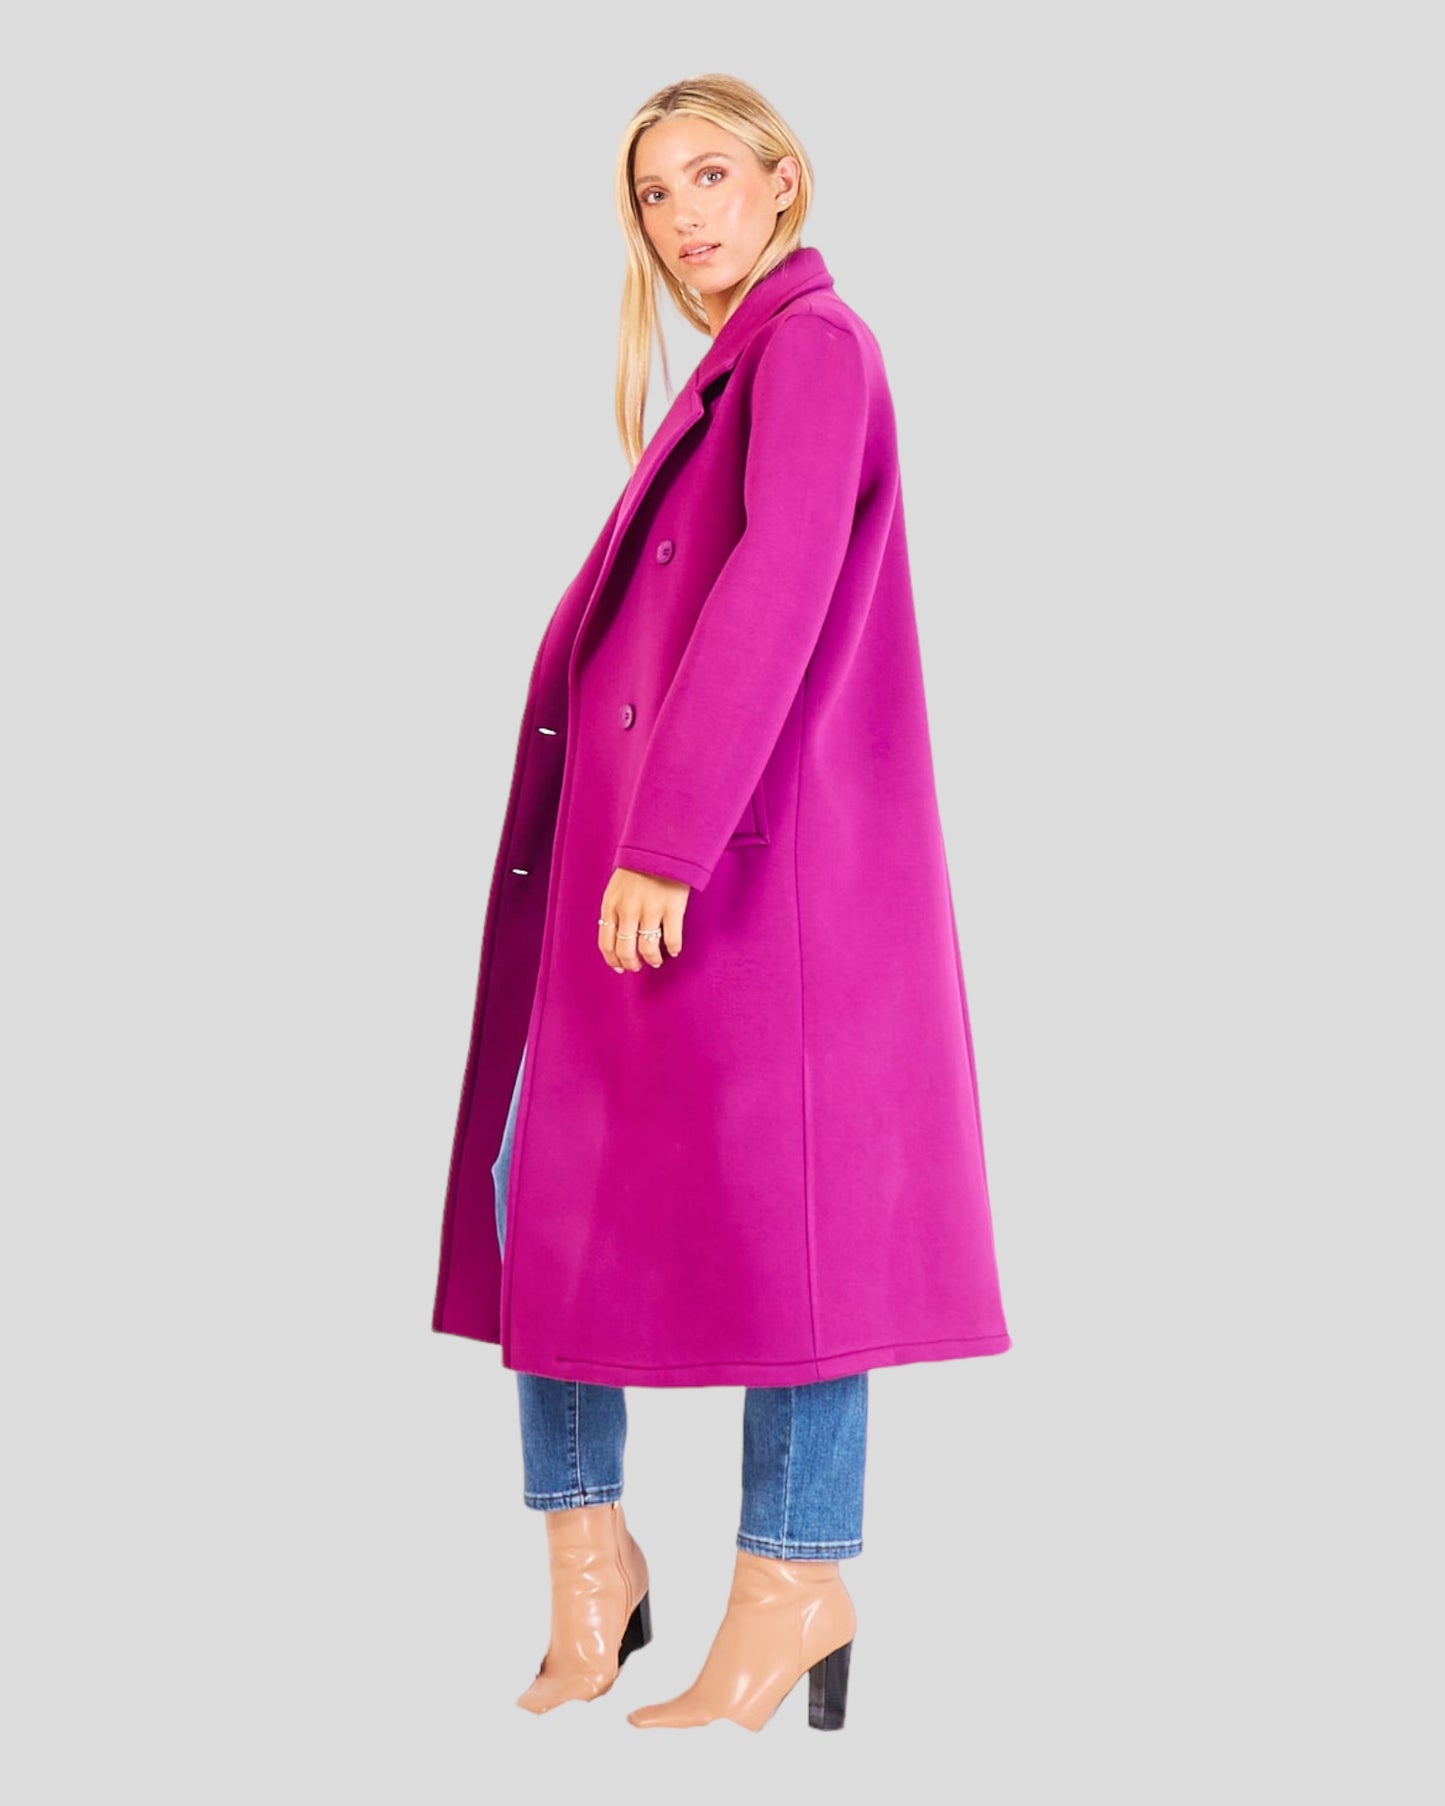 Classic Italian Long Overcoat. This sophisticated overcoat is characterized by a double-breasted design with six buttons and two convenient pockets. Crafted from a blend of faux wool and acrylic, it combines style and comfort seamlessly. Color Magenta